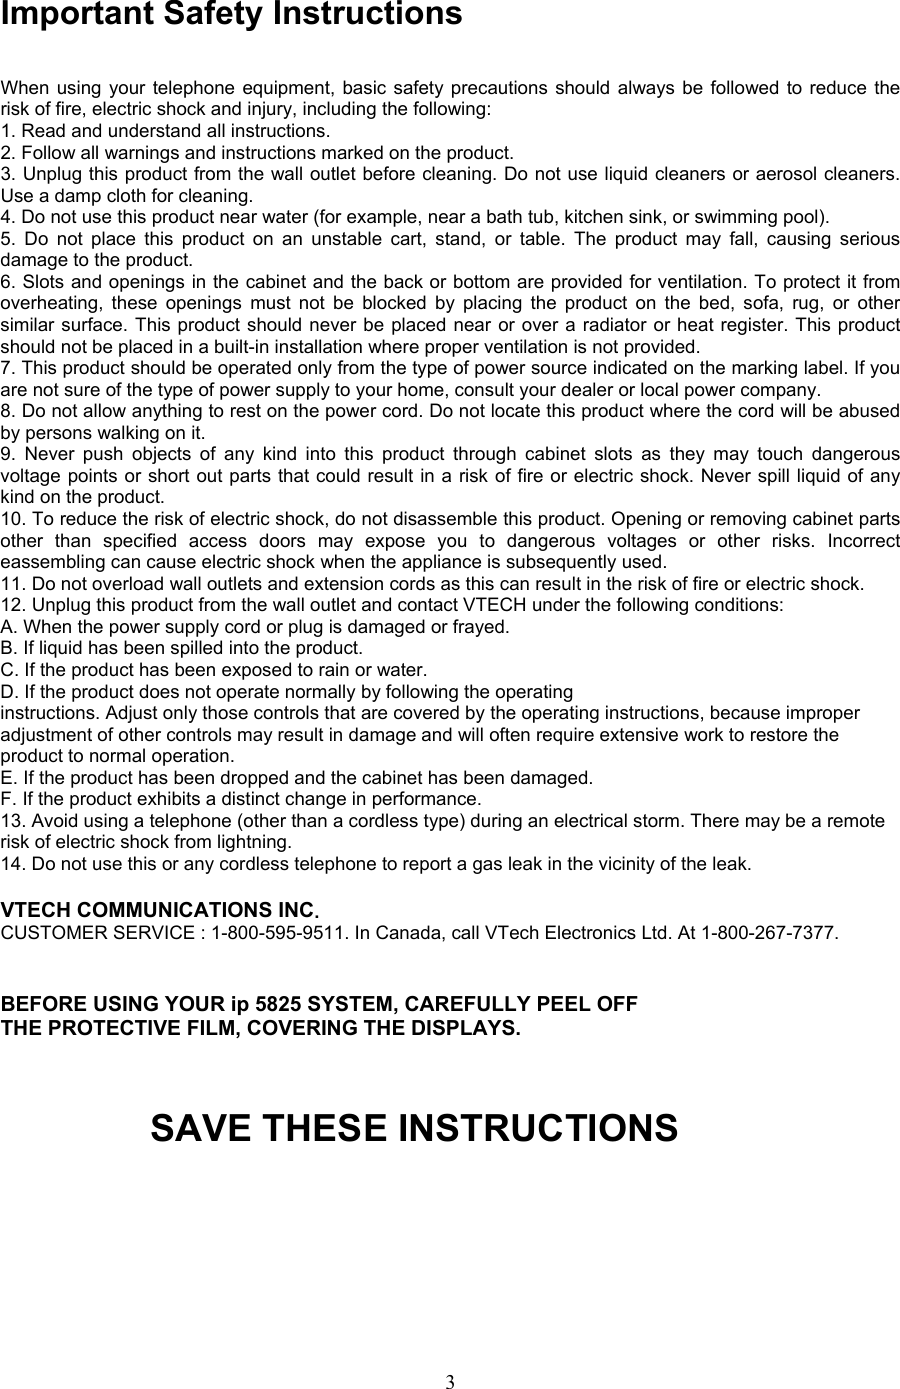  Important Safety Instructions  When using your telephone equipment, basic safety precautions should always be followed to reduce the risk of fire, electric shock and injury, including the following: 1. Read and understand all instructions. 2. Follow all warnings and instructions marked on the product. 3. Unplug this product from the wall outlet before cleaning. Do not use liquid cleaners or aerosol cleaners. Use a damp cloth for cleaning. 4. Do not use this product near water (for example, near a bath tub, kitchen sink, or swimming pool). 5. Do not place this product on an unstable cart, stand, or table. The product may fall, causing serious damage to the product. 6. Slots and openings in the cabinet and the back or bottom are provided for ventilation. To protect it from overheating, these openings must not be blocked by placing the product on the bed, sofa, rug, or other similar surface. This product should never be placed near or over a radiator or heat register. This product should not be placed in a built-in installation where proper ventilation is not provided. 7. This product should be operated only from the type of power source indicated on the marking label. If you are not sure of the type of power supply to your home, consult your dealer or local power company. 8. Do not allow anything to rest on the power cord. Do not locate this product where the cord will be abused by persons walking on it. 9. Never push objects of any kind into this product through cabinet slots as they may touch dangerous voltage points or short out parts that could result in a risk of fire or electric shock. Never spill liquid of any kind on the product. 10. To reduce the risk of electric shock, do not disassemble this product. Opening or removing cabinet parts other than specified access doors may expose you to dangerous voltages or other risks. Incorrect  eassembling can cause electric shock when the appliance is subsequently used. 11. Do not overload wall outlets and extension cords as this can result in the risk of fire or electric shock. 12. Unplug this product from the wall outlet and contact VTECH under the following conditions: A. When the power supply cord or plug is damaged or frayed. B. If liquid has been spilled into the product. C. If the product has been exposed to rain or water. D. If the product does not operate normally by following the operating instructions. Adjust only those controls that are covered by the operating instructions, because improper adjustment of other controls may result in damage and will often require extensive work to restore the product to normal operation. E. If the product has been dropped and the cabinet has been damaged. F. If the product exhibits a distinct change in performance. 13. Avoid using a telephone (other than a cordless type) during an electrical storm. There may be a remote risk of electric shock from lightning. 14. Do not use this or any cordless telephone to report a gas leak in the vicinity of the leak.  VTECH COMMUNICATIONS INC. CUSTOMER SERVICE : 1-800-595-9511. In Canada, call VTech Electronics Ltd. At 1-800-267-7377.   BEFORE USING YOUR ip 5825 SYSTEM, CAREFULLY PEEL OFF THE PROTECTIVE FILM, COVERING THE DISPLAYS.   SAVE THESE INSTRUCTIONS      3